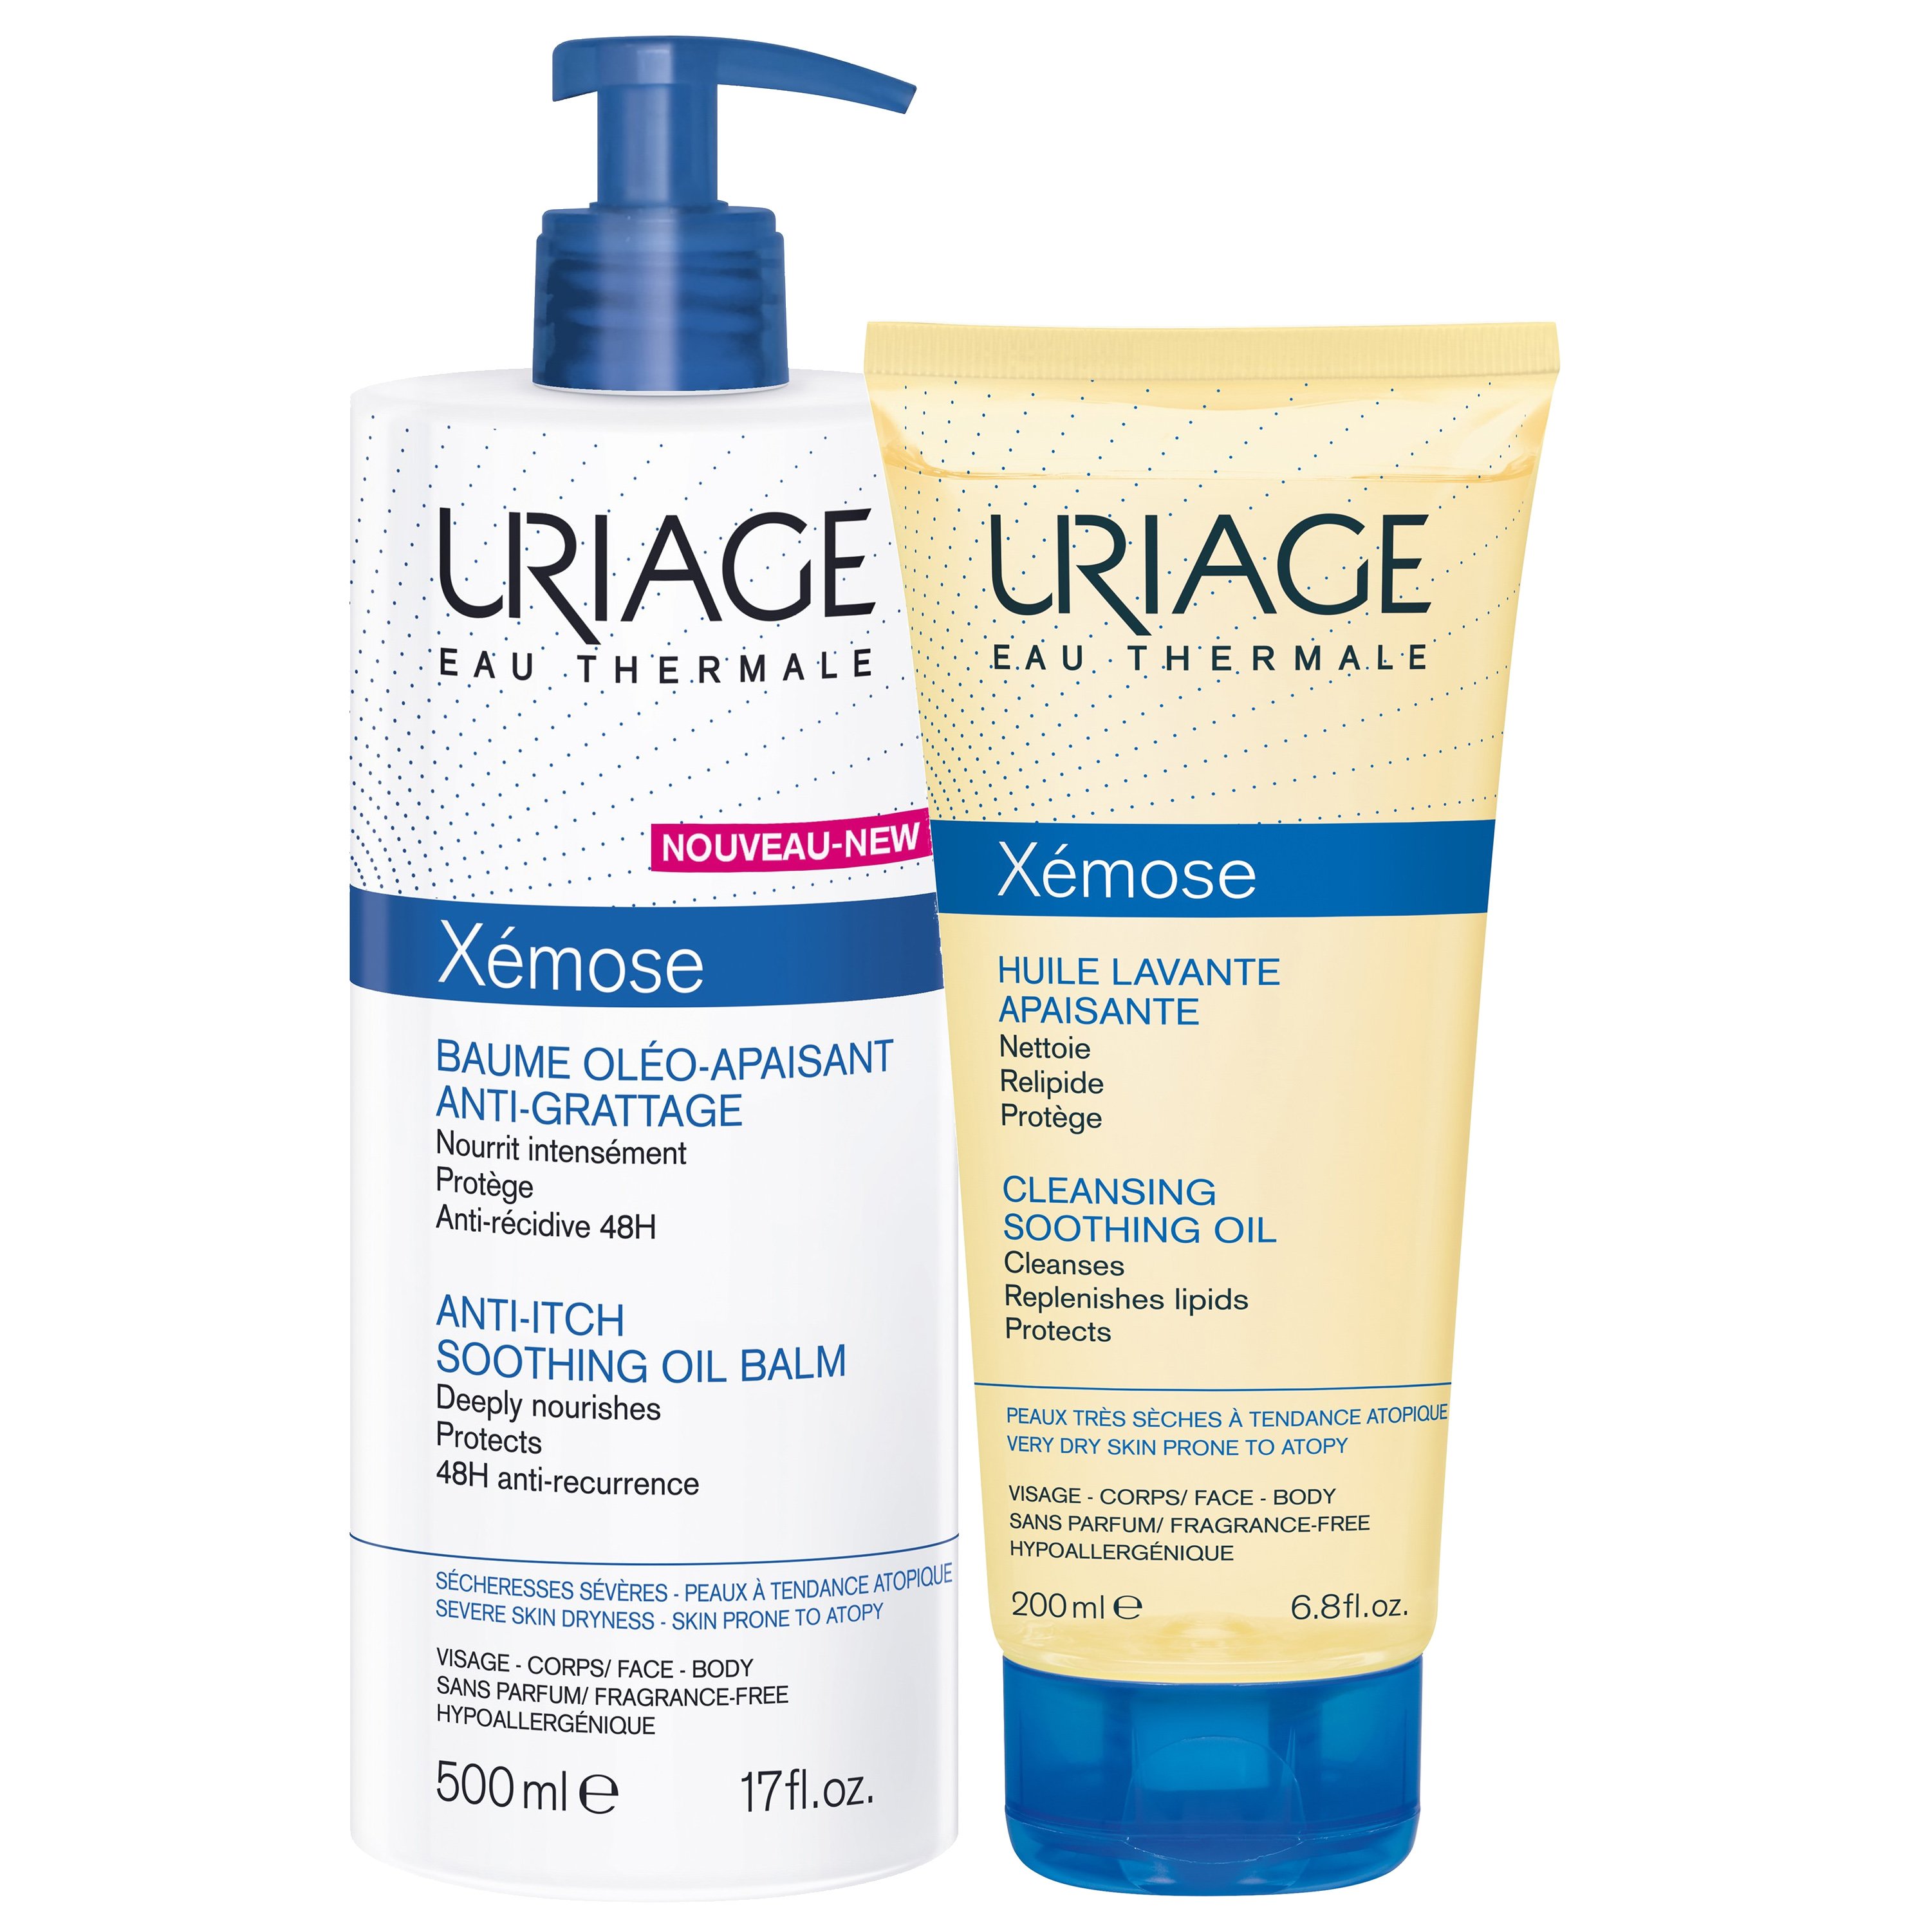 Uriage Eau Thermale Xemose Πακέτο Προσφοράς Anti-Itch Soothing Oil Balm 500ml & Δώρο Cleansing Soothing Oil 200ml